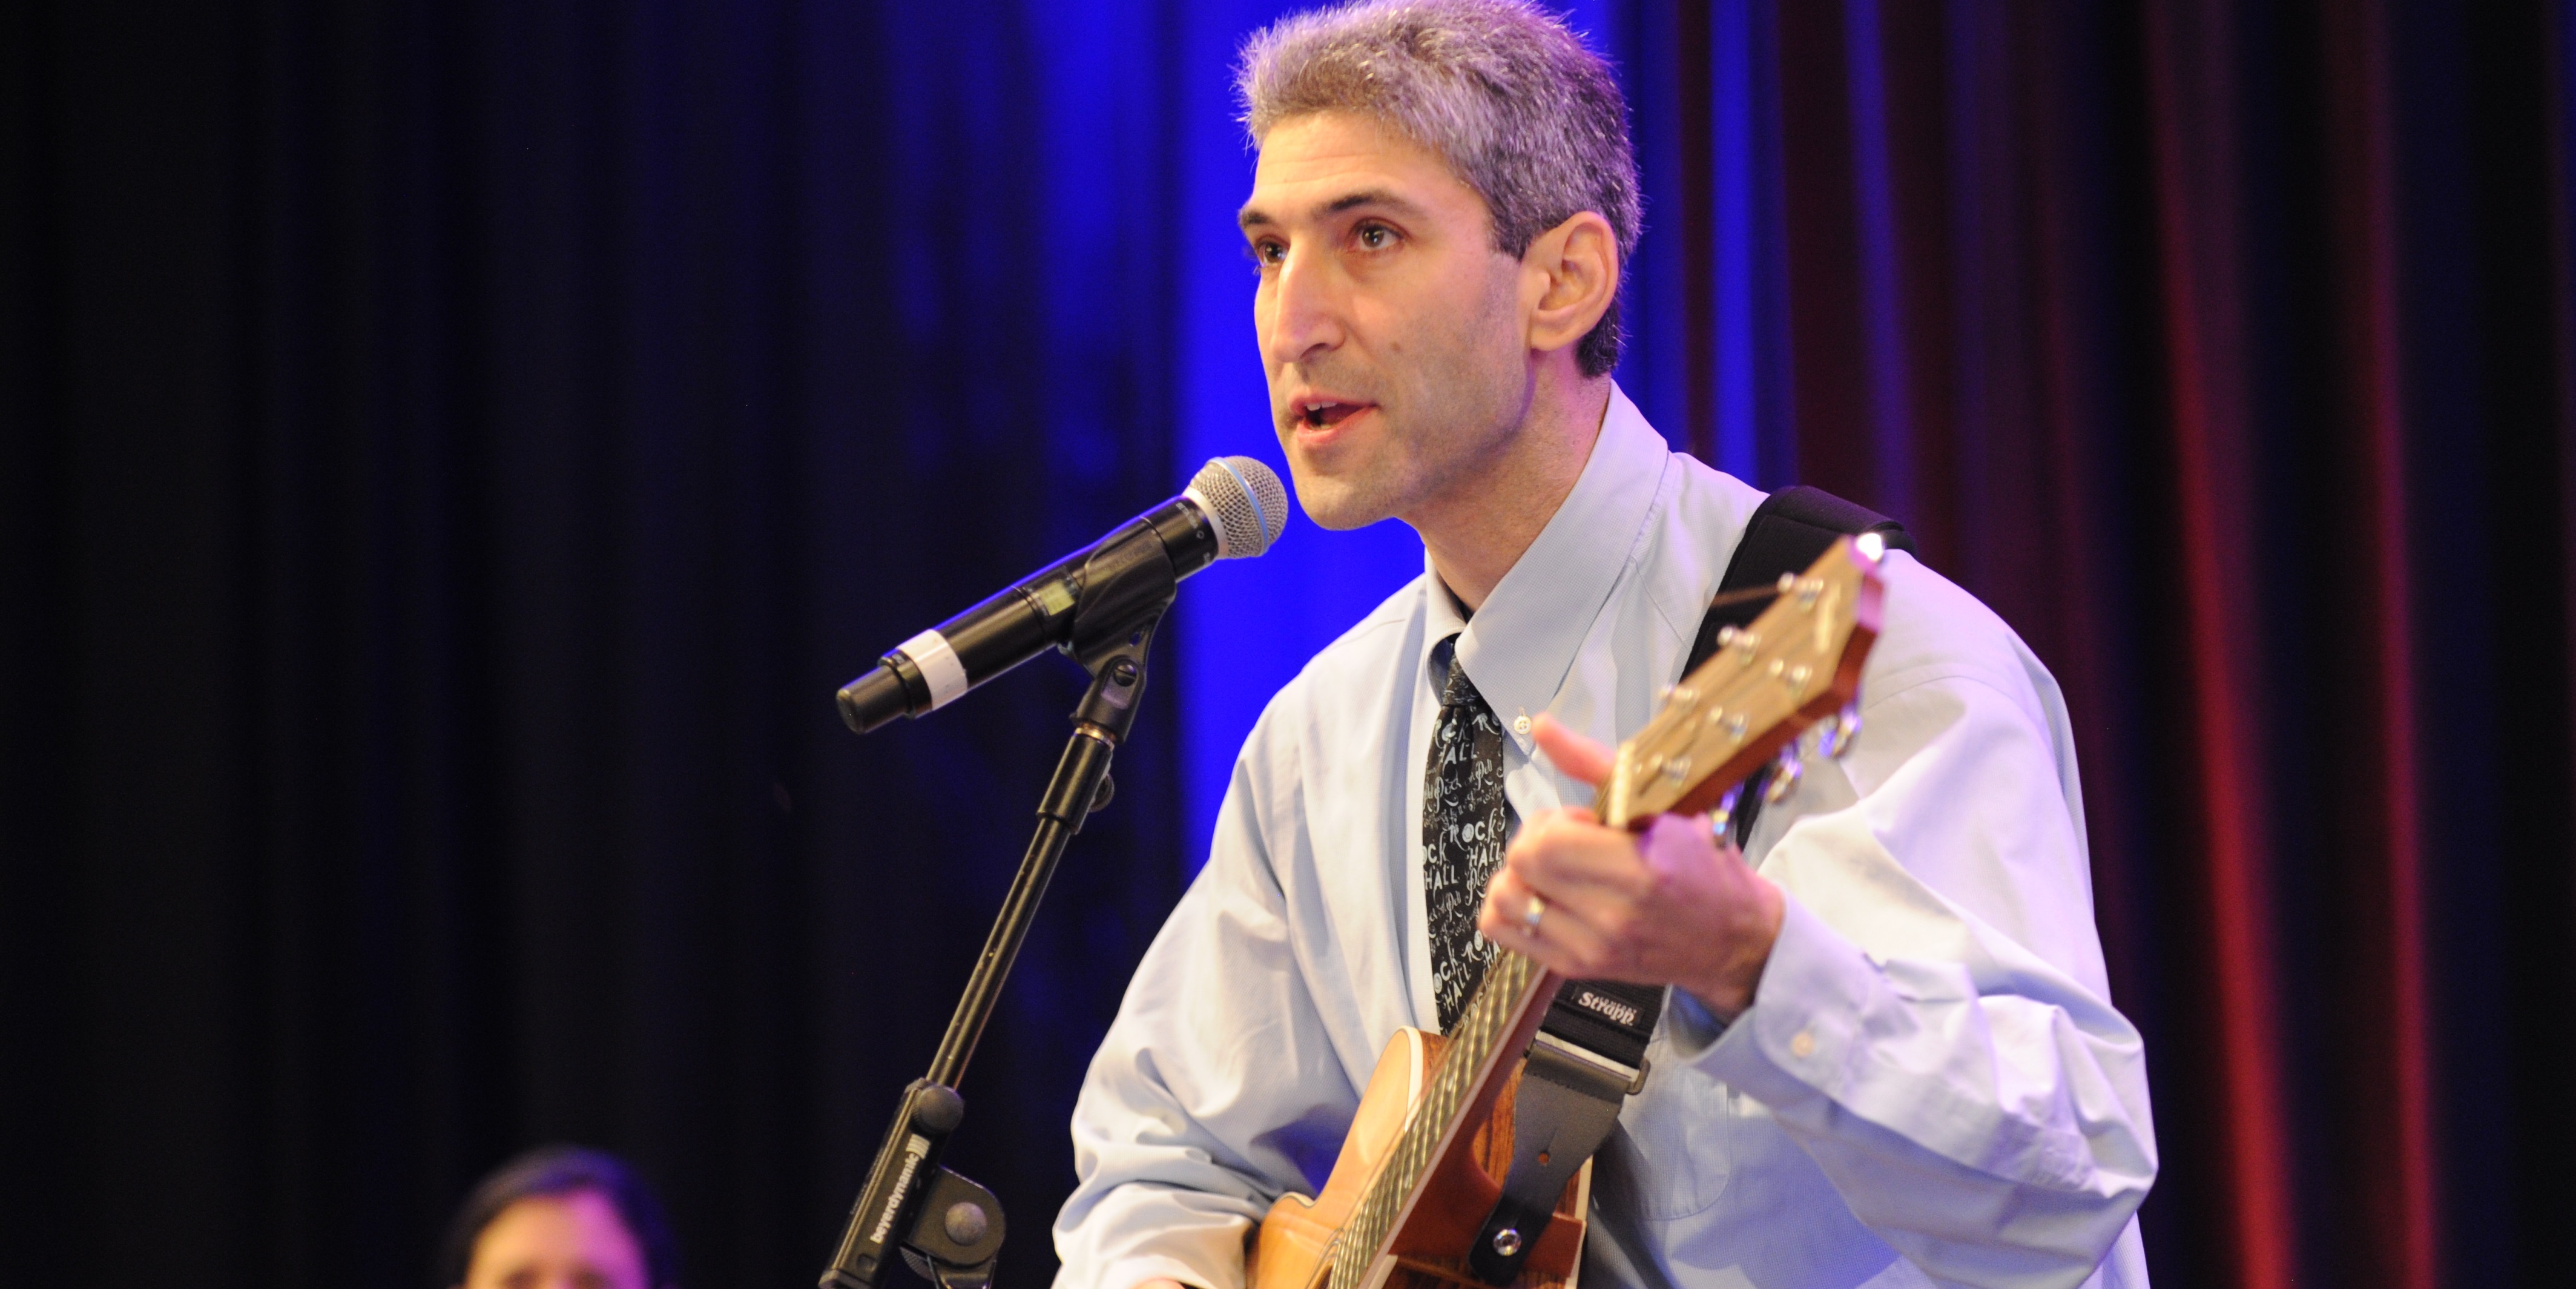 Dr. David Chambers performs at the 10th Annual Conference on the Science of Dissemination and Implementation in Health.